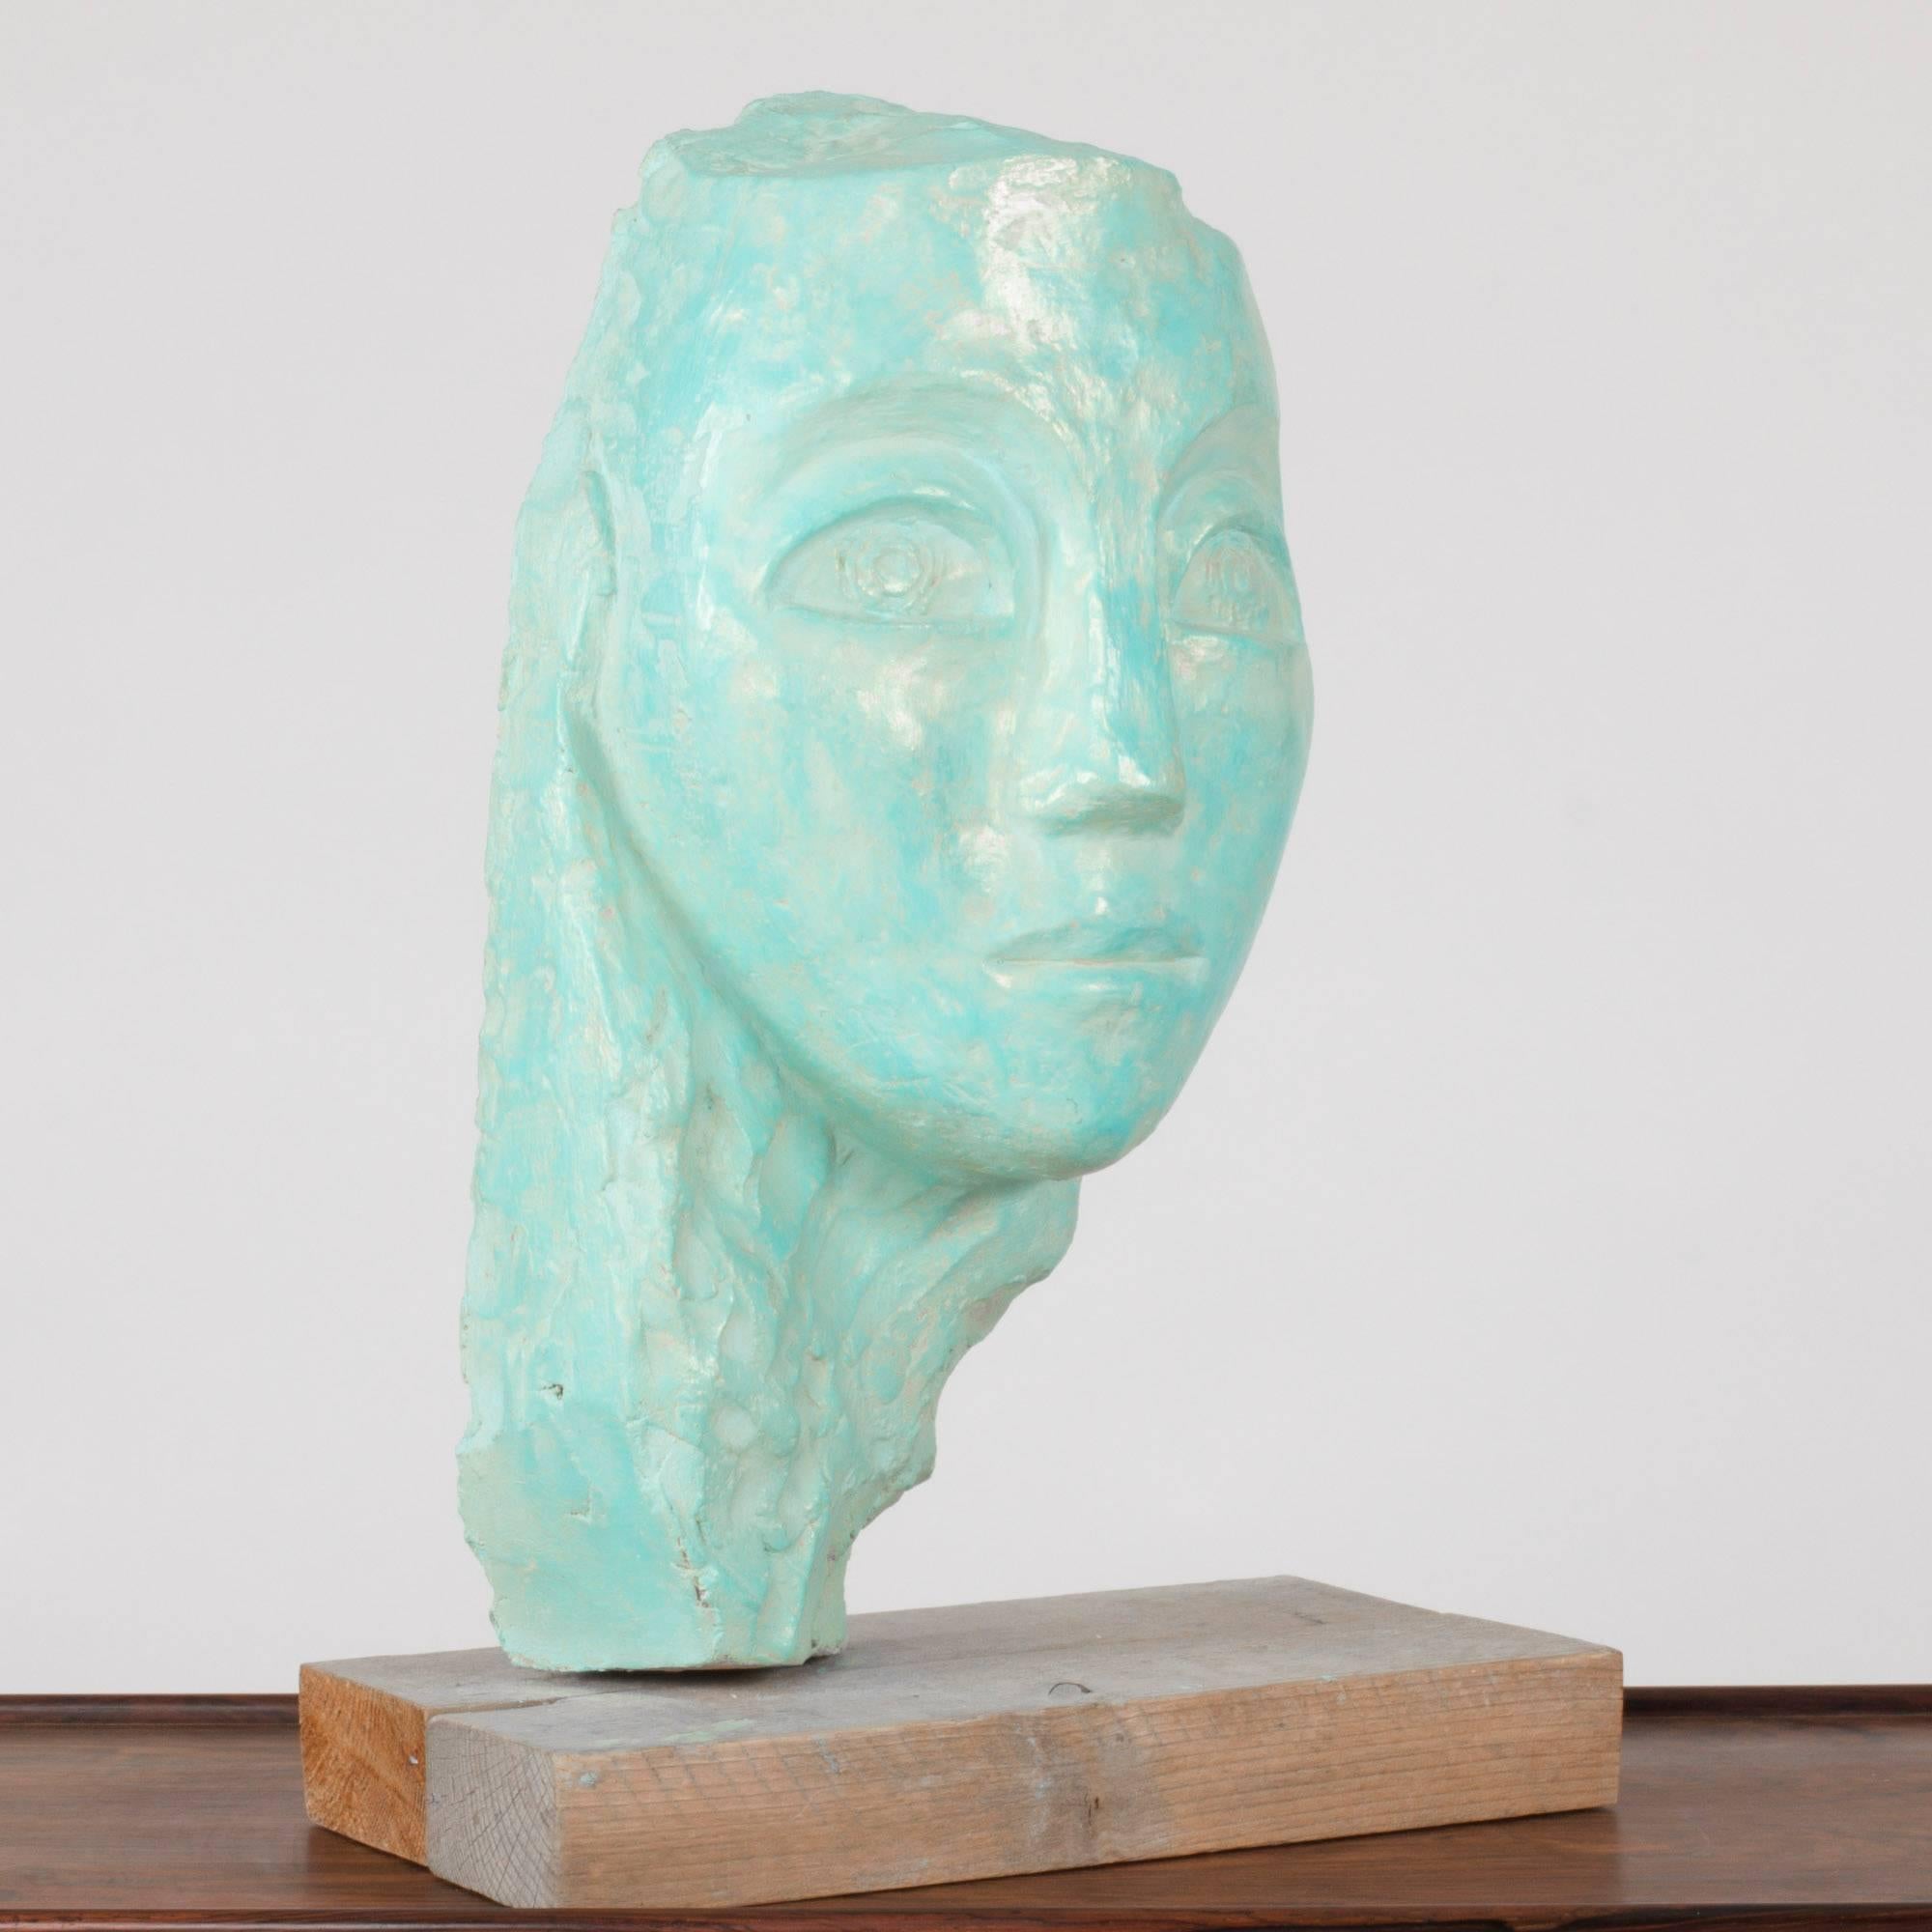 Soulful earthenware sculpture of a face by Lennart Olausson. Glazed turquoise with a slight shimmer.

Lennart Olausson (born 1944) is a Swedish artist, educated at Konstfack 1961-1965 and Kungliga Konsthögskolan (Royal Swedish Art Academy)